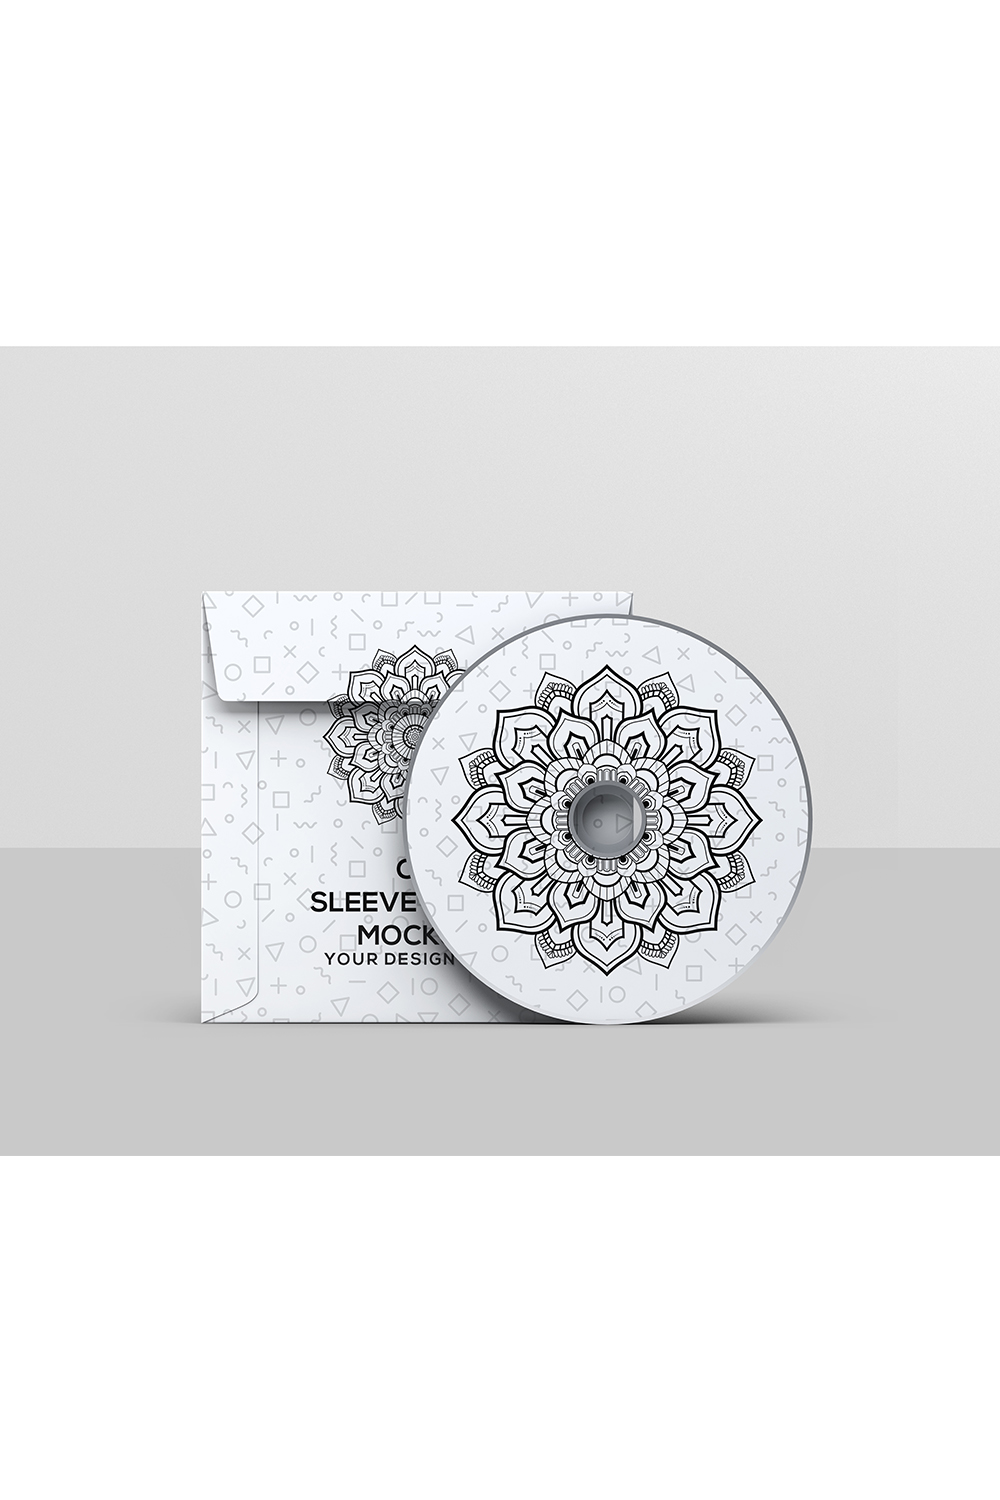 CD Sleeve Cover Mockup pinterest preview image.